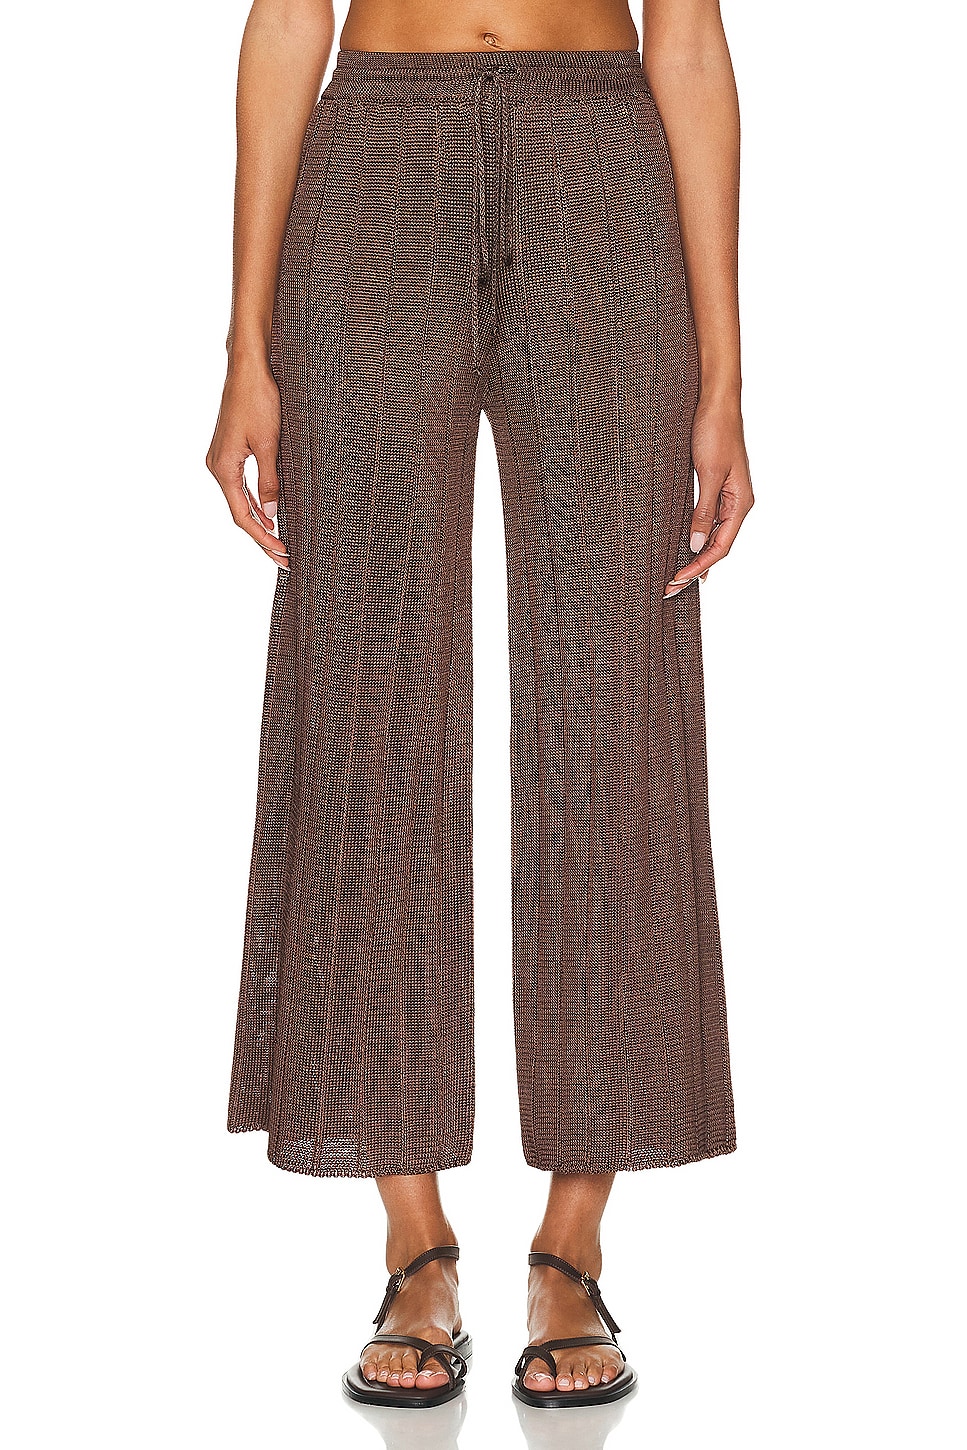 Wide Rib Pant in Chocolate